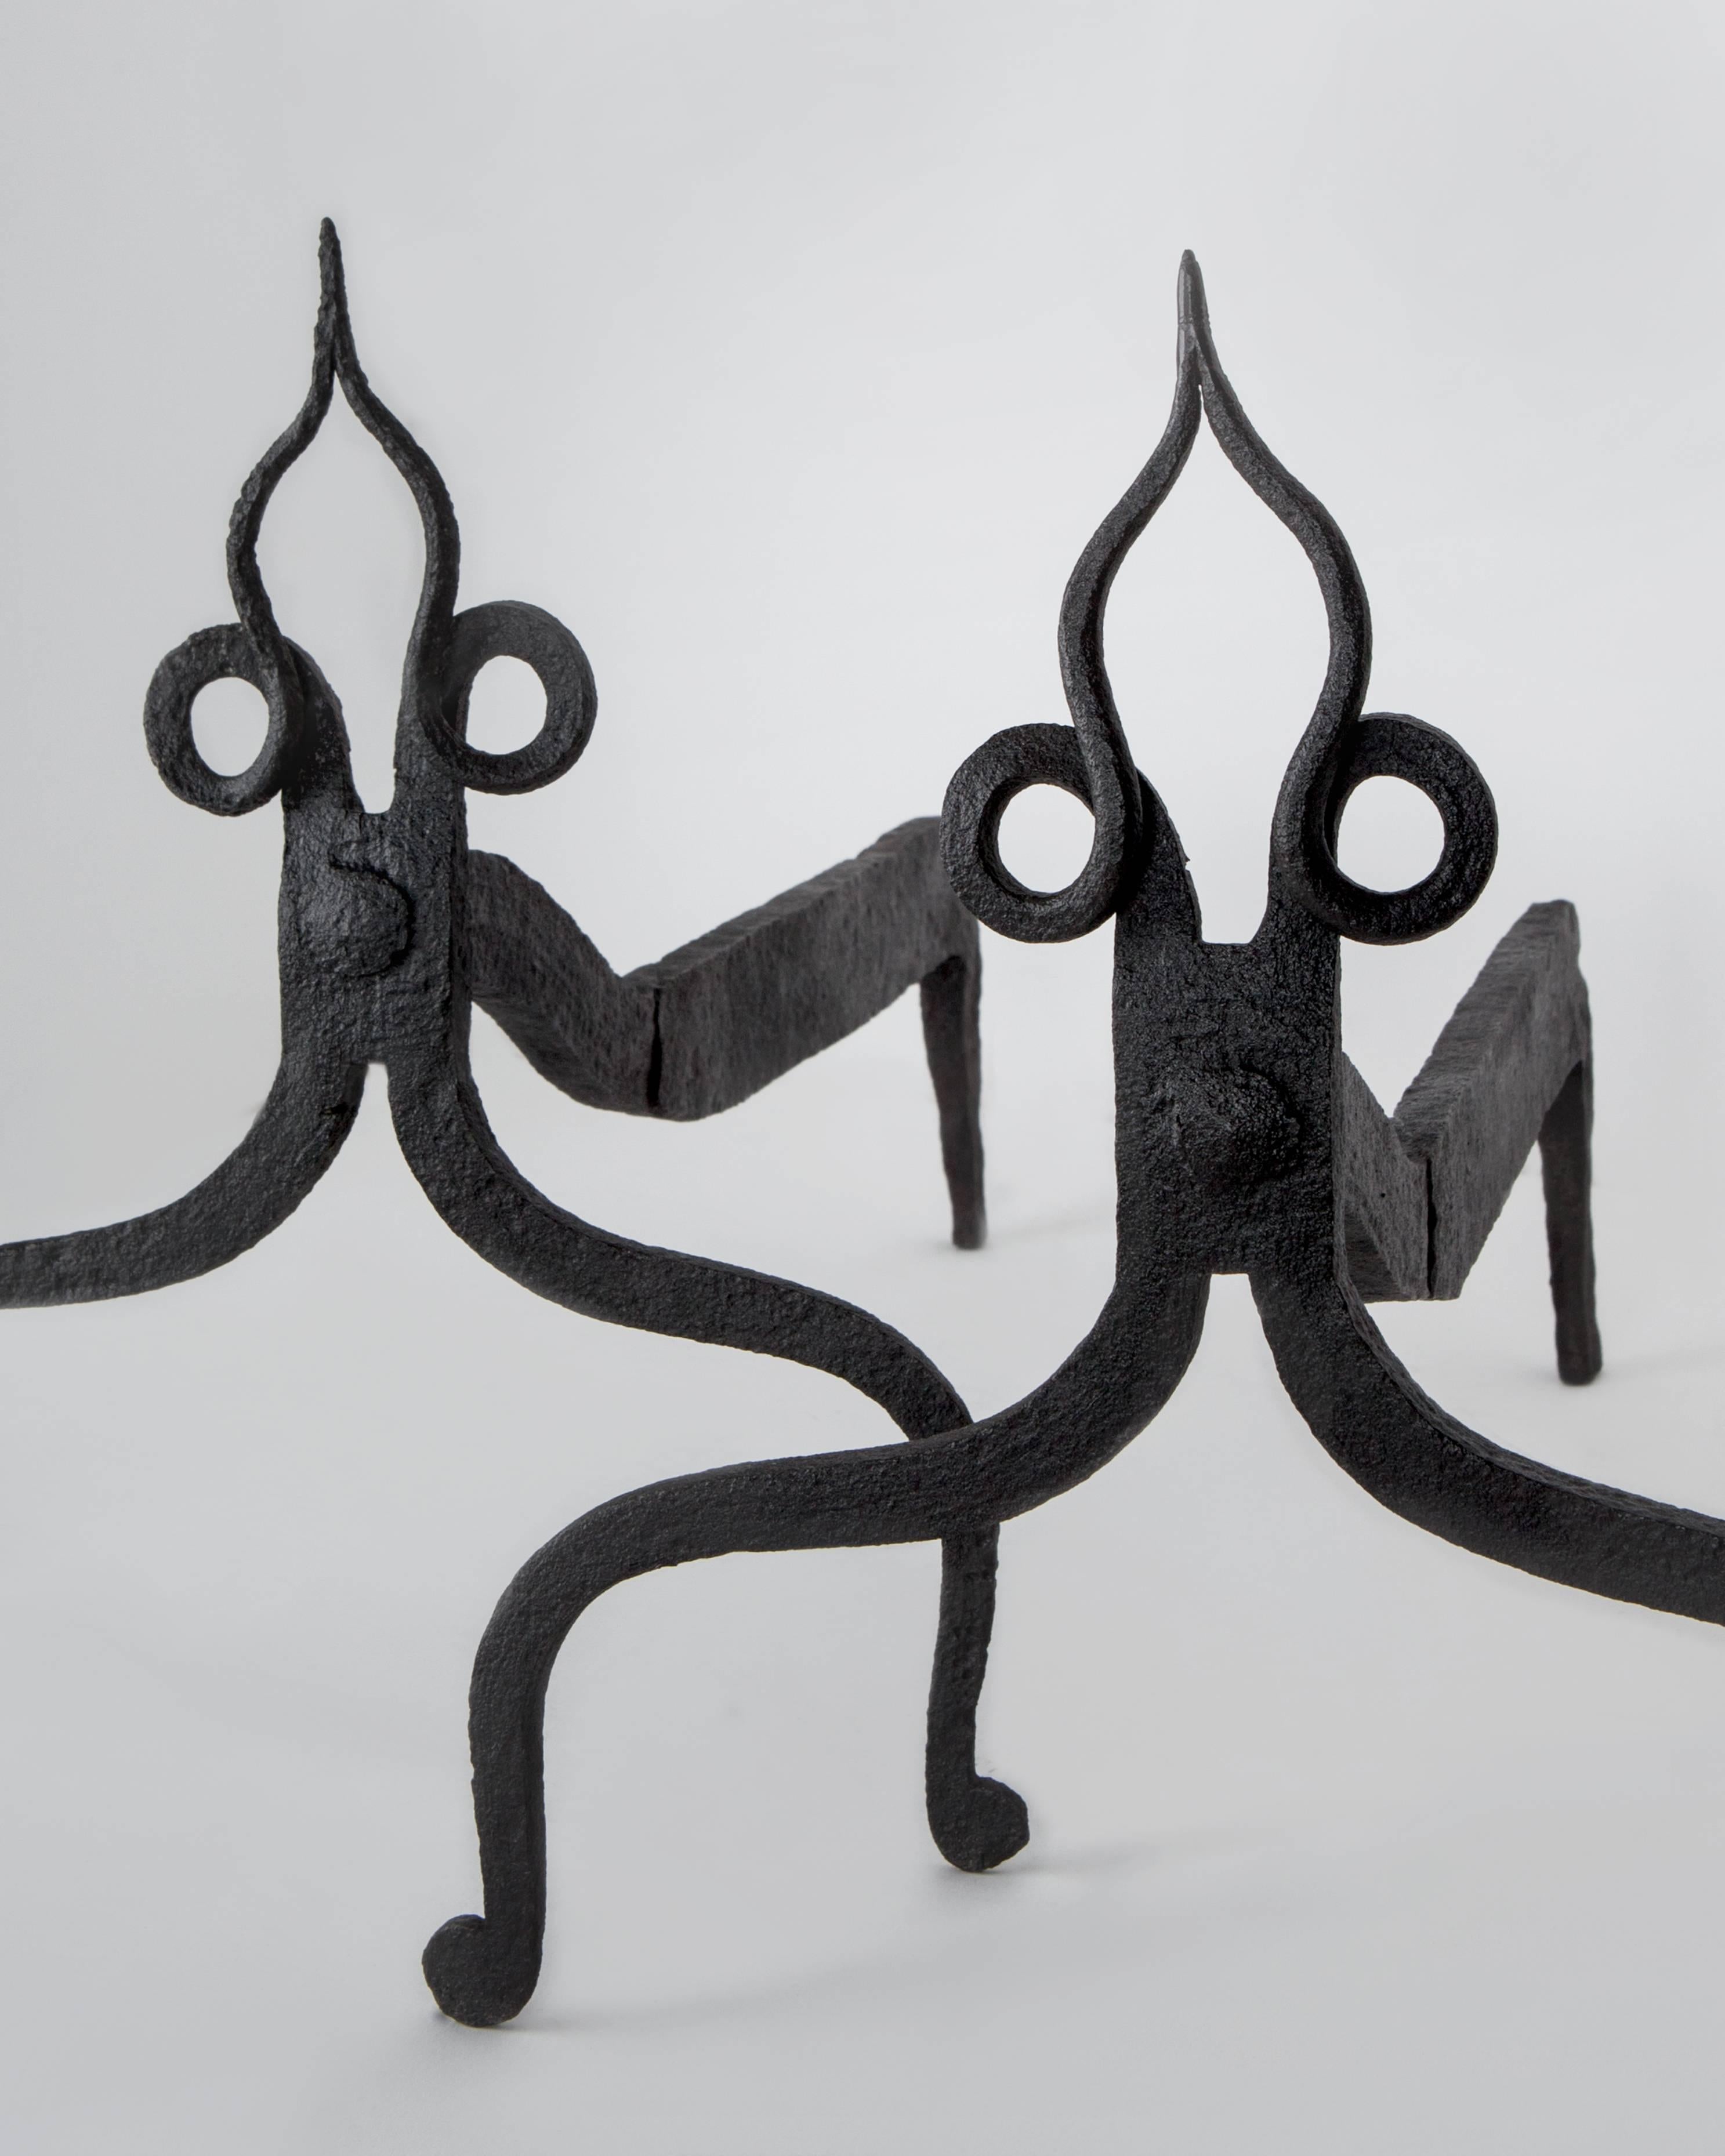 AFP0525
A pair of antique blackened wrought iron andirons with delicate spade shaped finials. Circa 1920s.

Dimensions:
Overall: 11-1/2